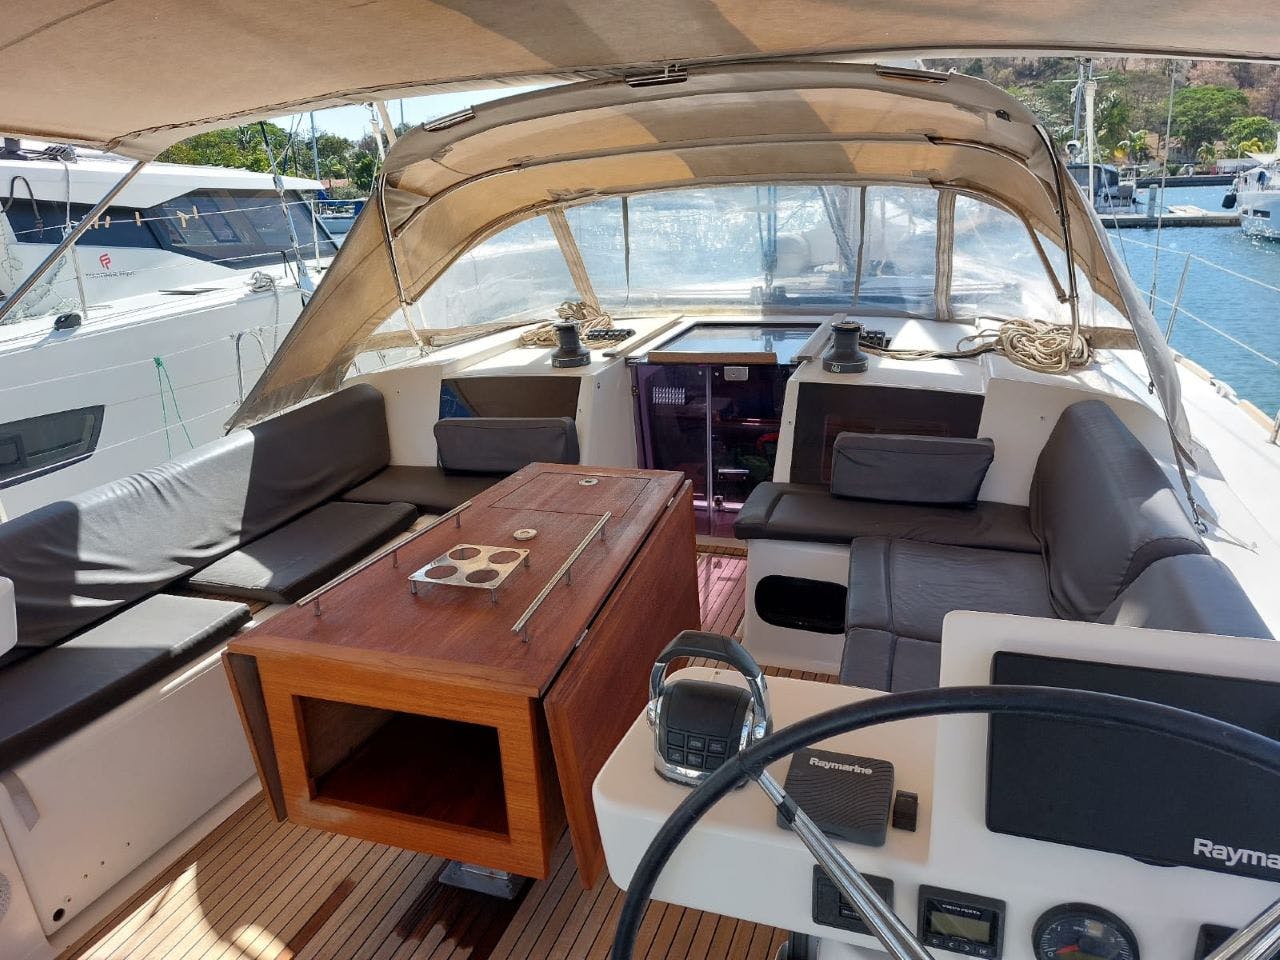 Book Dufour 520 GL Sailing yacht for bareboat charter in Antigua, Jolly Harbour Marina, Antigua, Caribbean with TripYacht!, picture 3